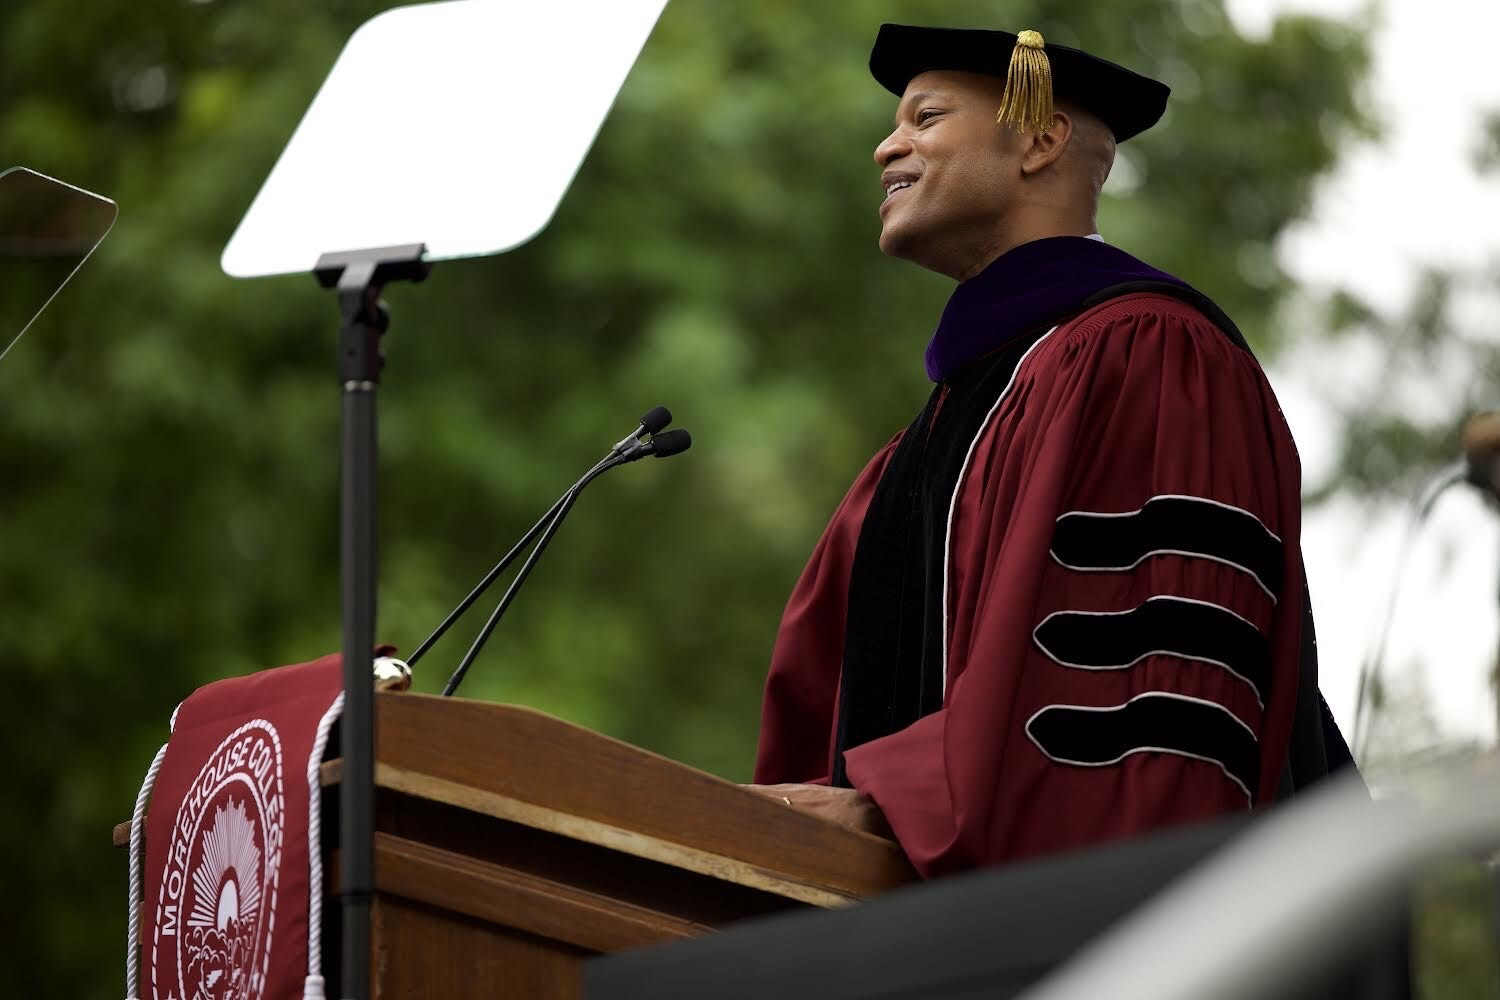 Gov Wes Moore at Morehouse College speaking at podium